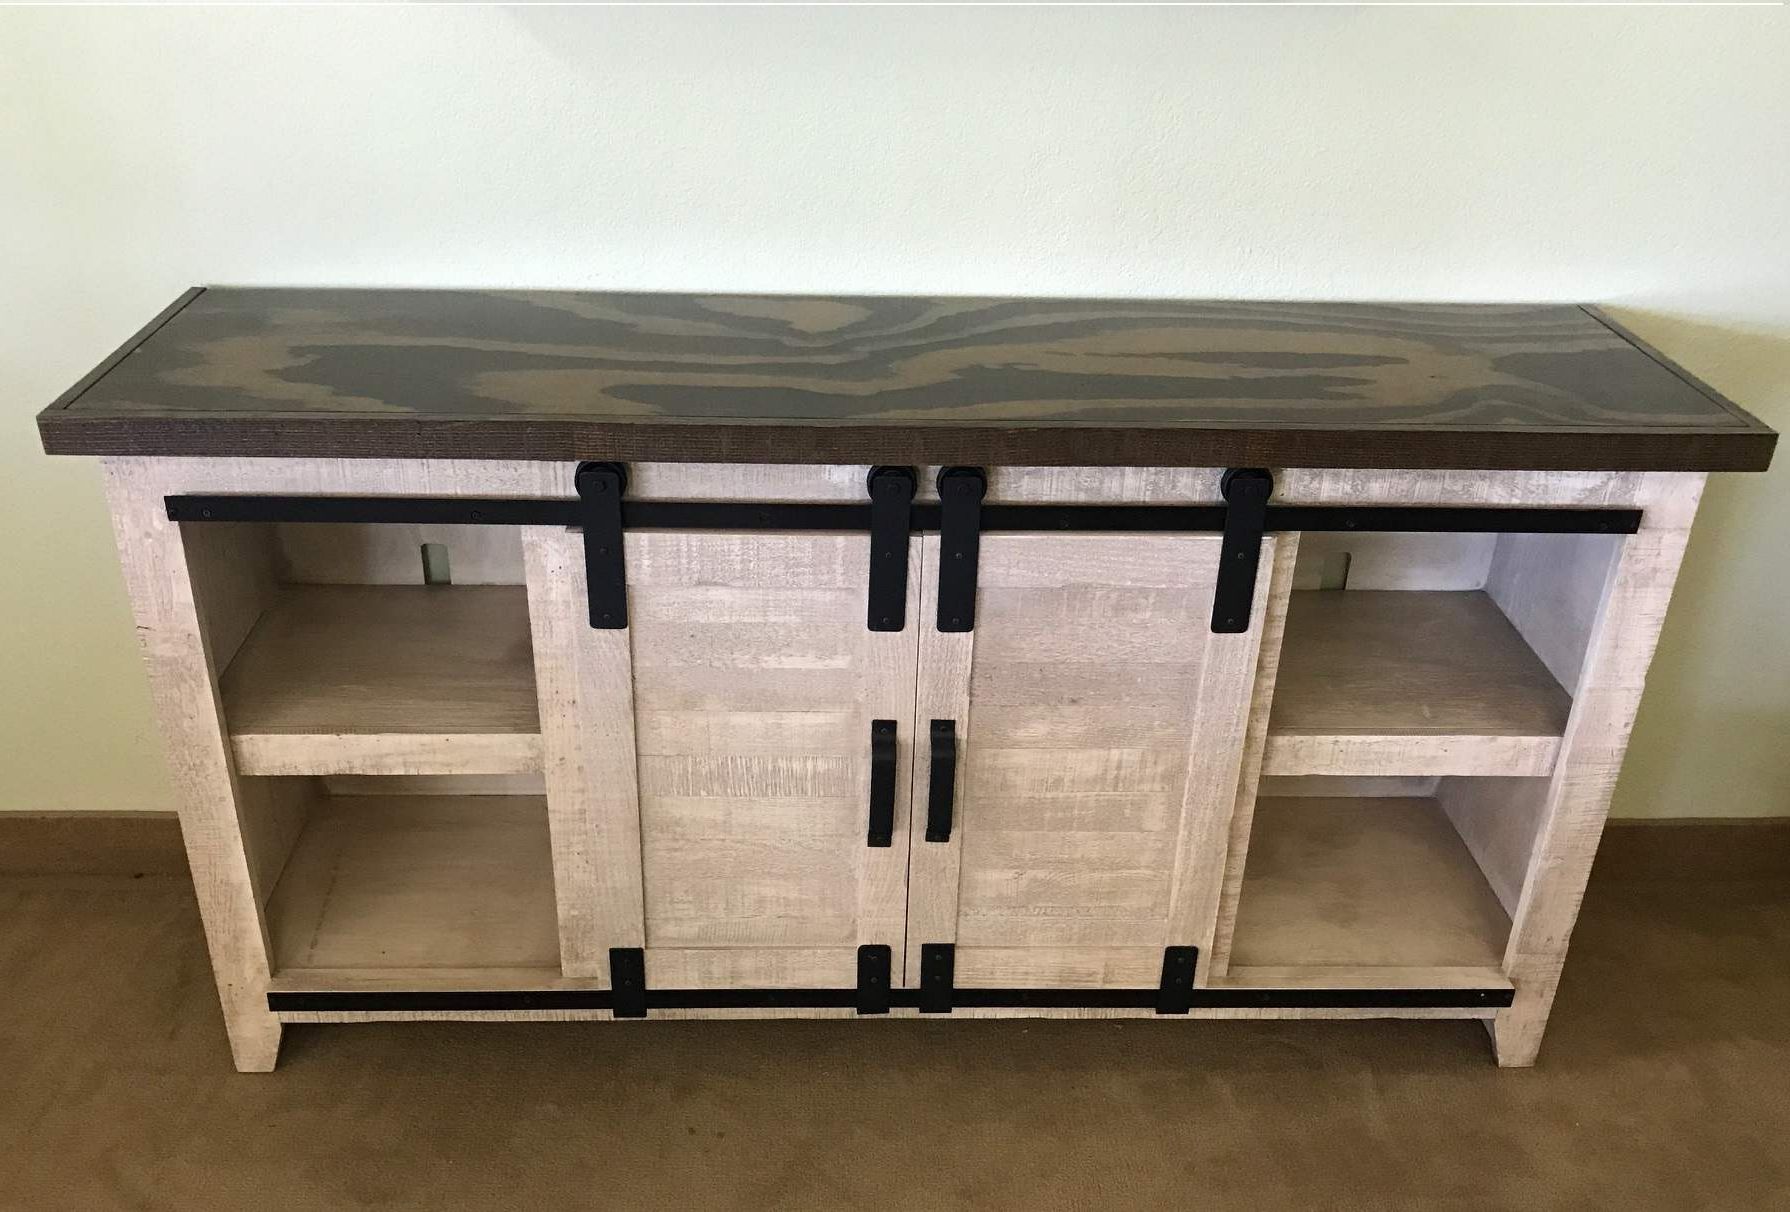 Two Tone Solid Wood Rustic Barn Door Tv Stand Within Urban Rustic Tv Stands (View 13 of 20)